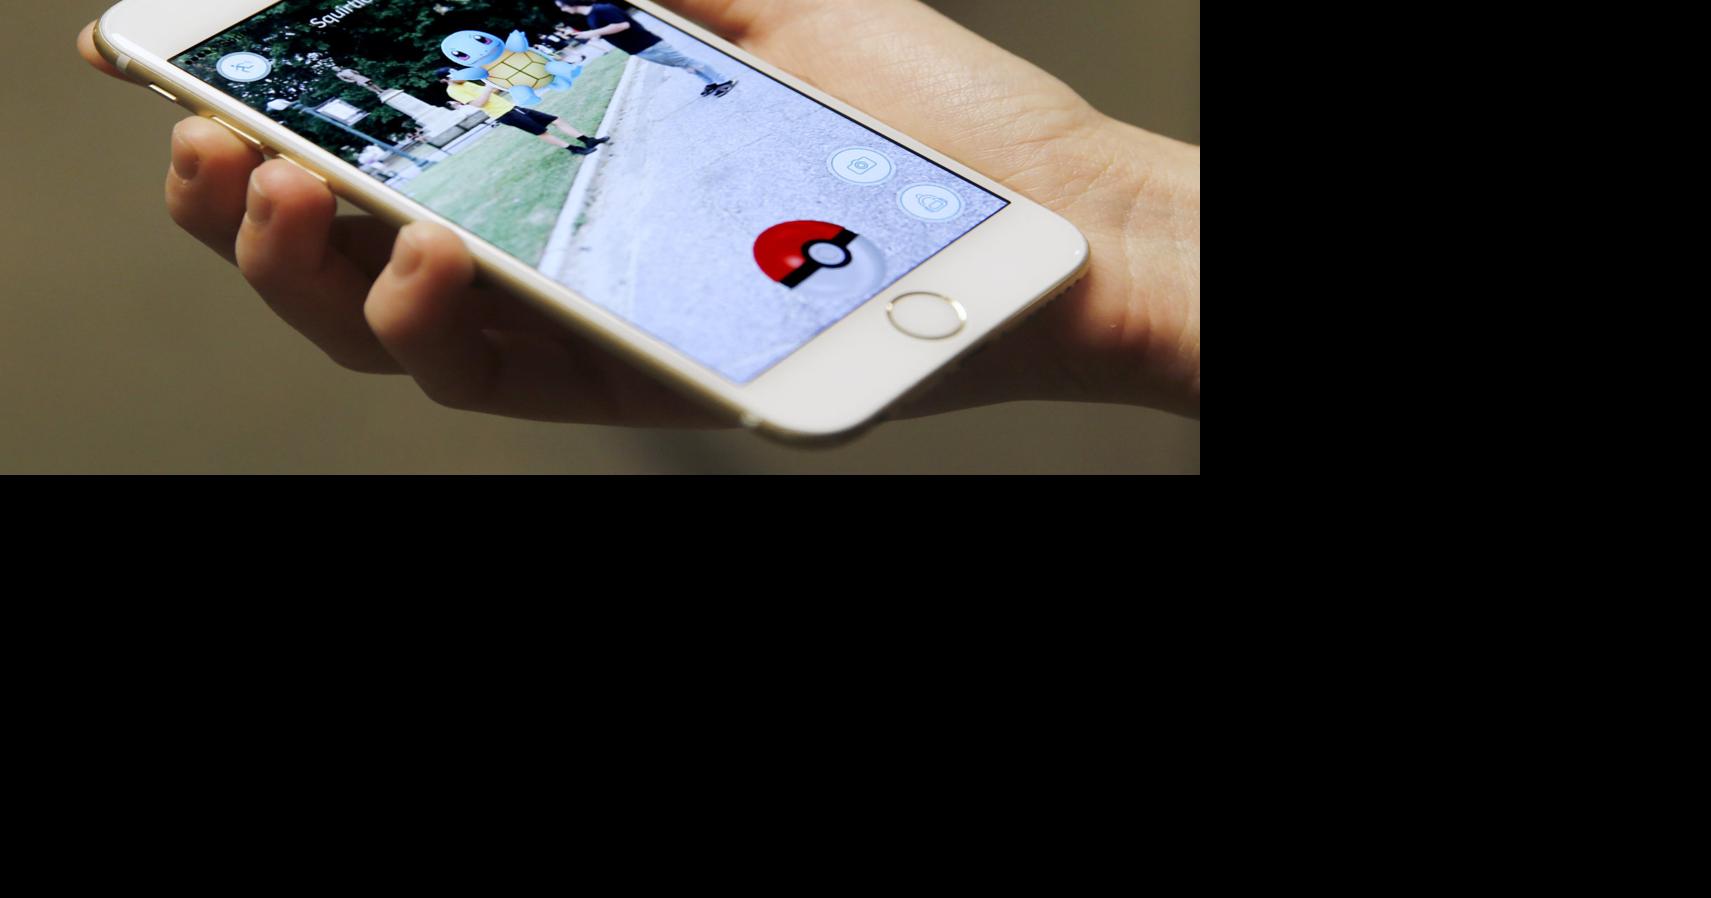 Pokémon GO addicts take the craze to new heights with clever